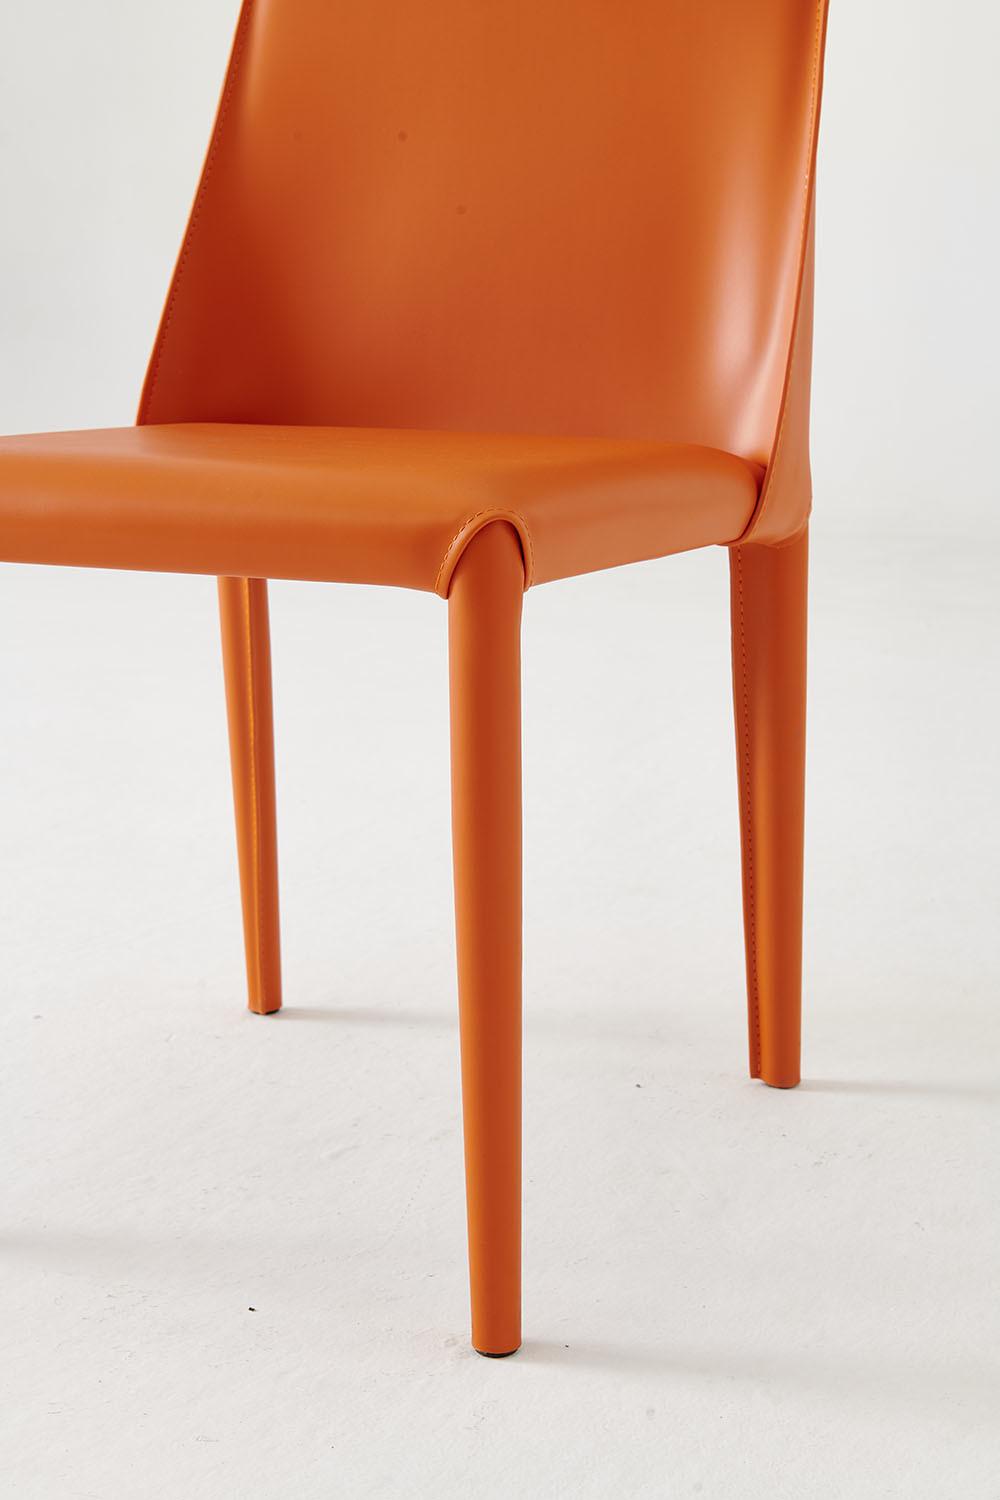 Hot Selling New Design Furniture Orange Office Chair